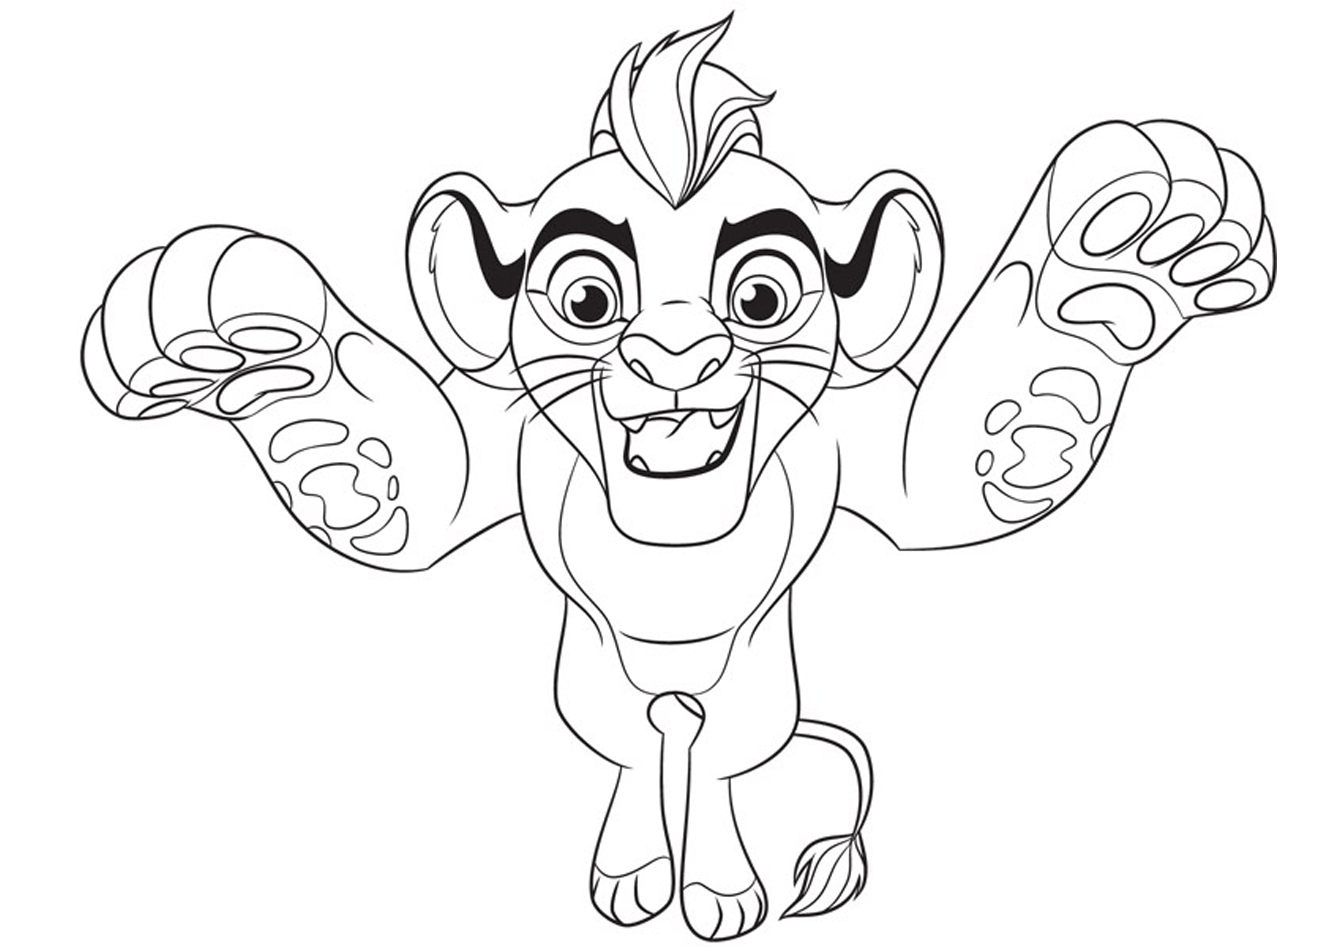 Lion Guard Coloring Pages - Best Coloring Pages For Kids